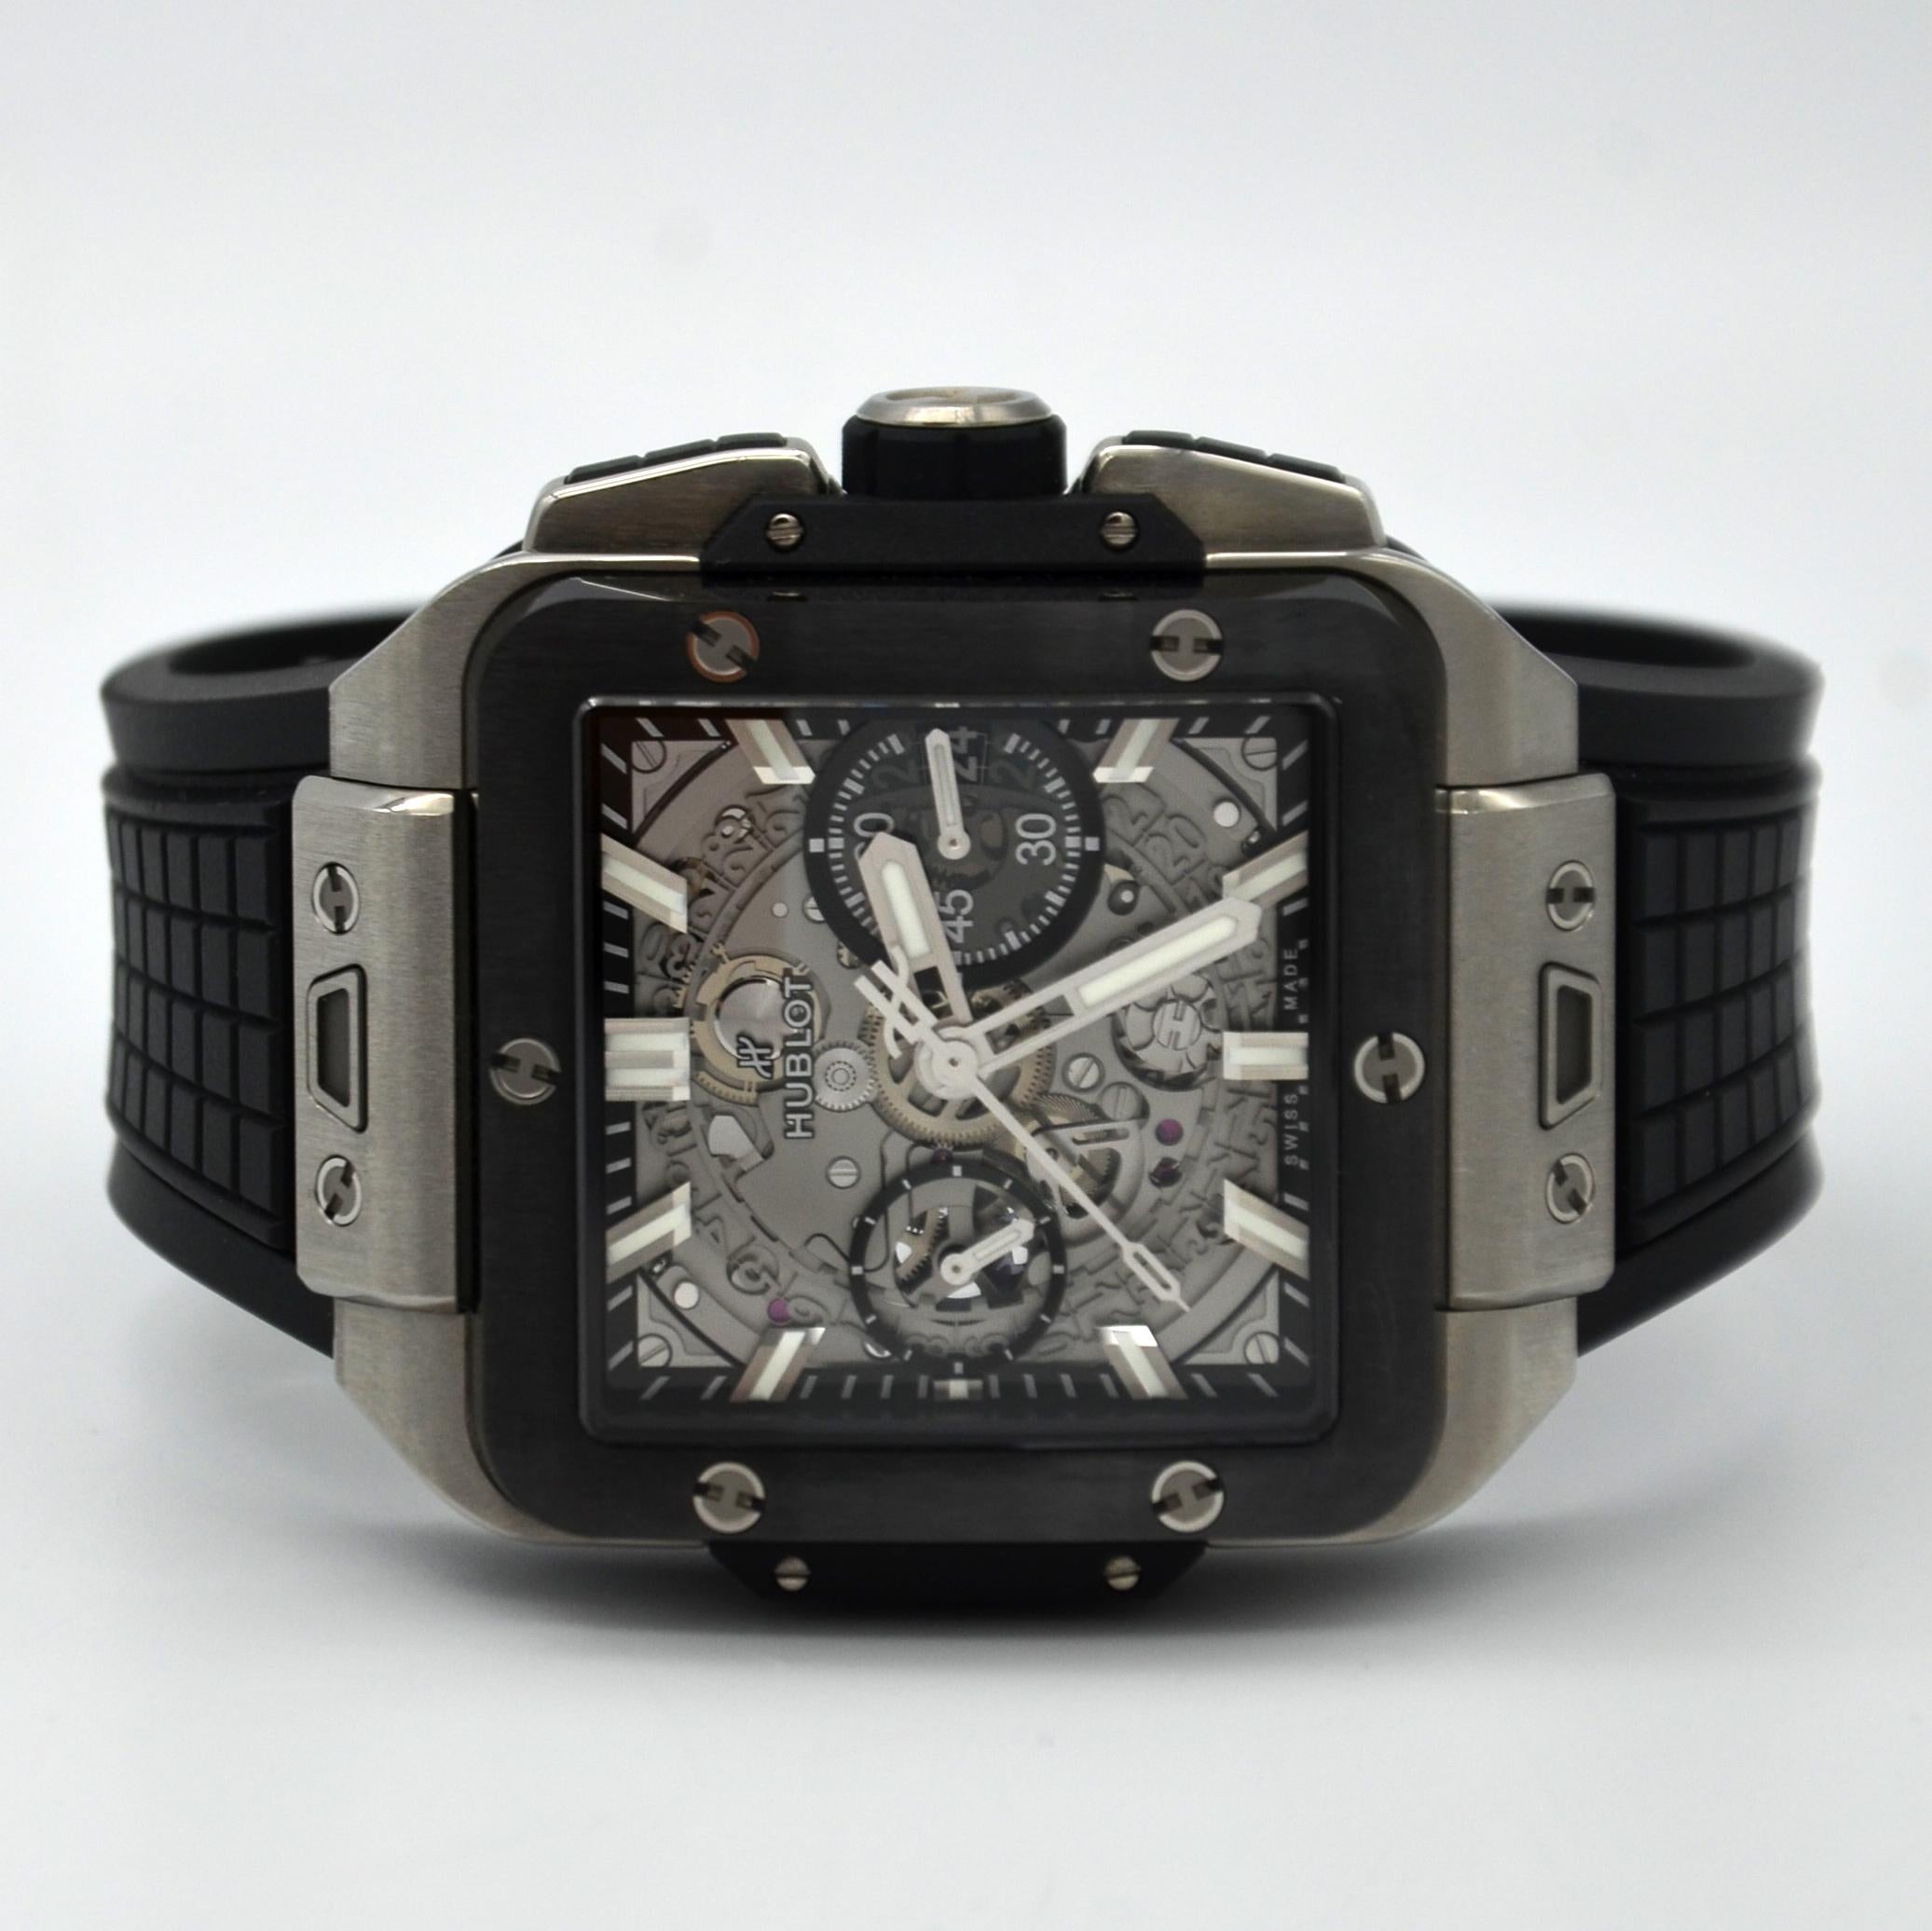 Hublot Square Bang Unico Titanium Ceramic Watch - 42 mm - Sapphire Crystal Dial - Black Structured Rubber Strap

42 mm satin-finished and polished titanium case, satin-finished and polished black ceramic bezel with 6 h-shaped titanium screws,